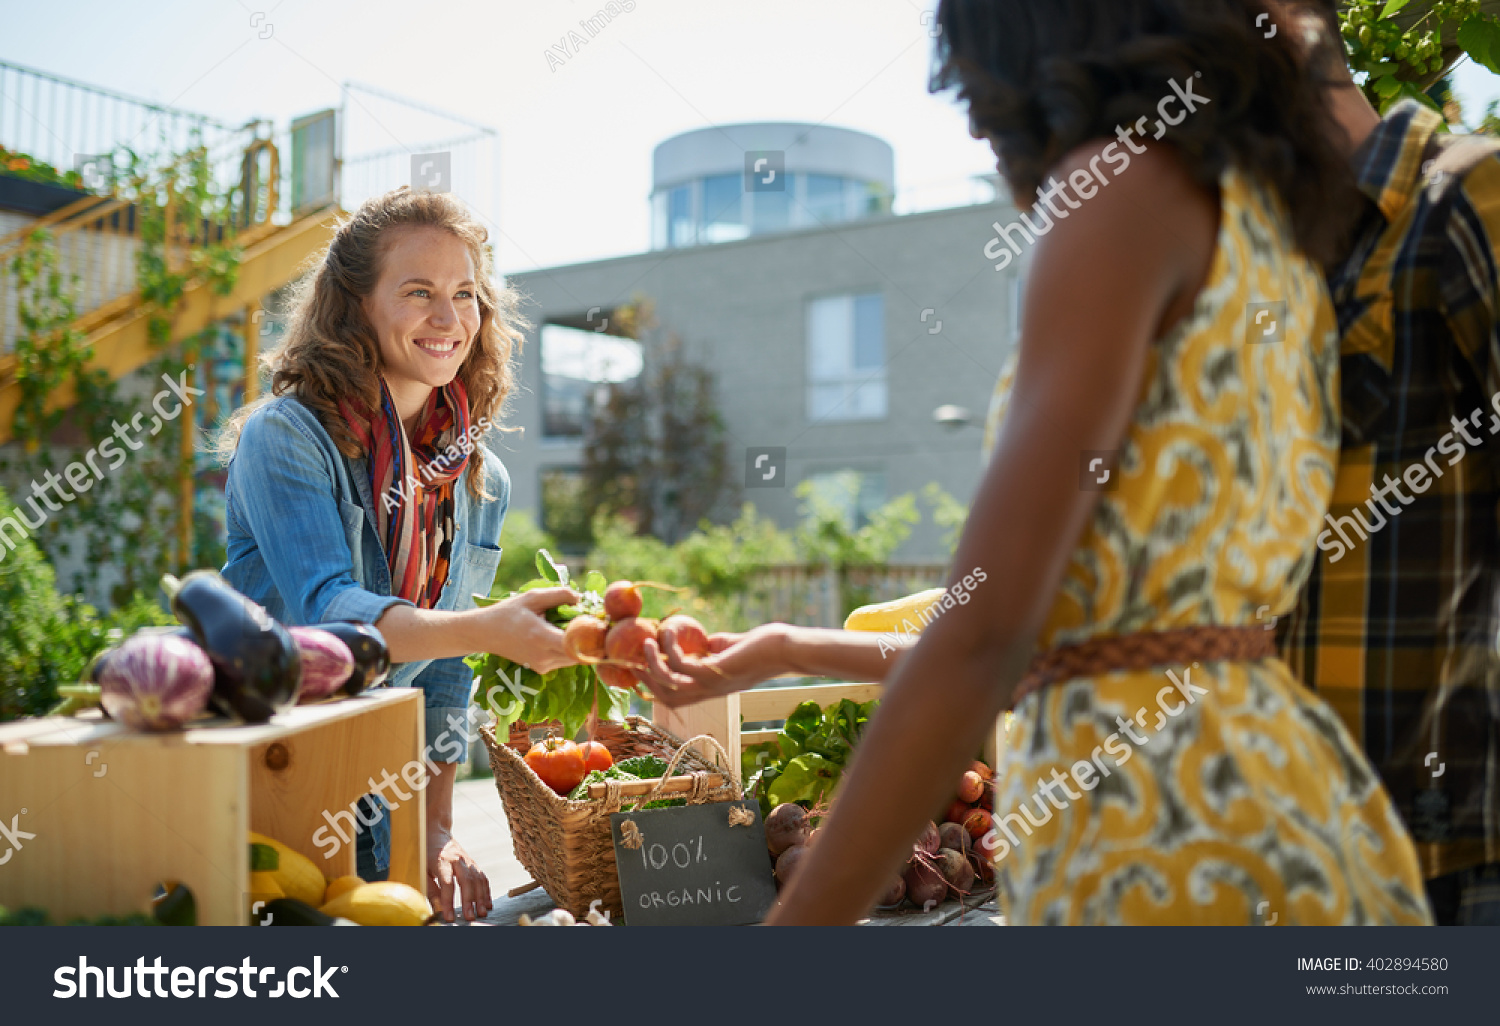 Friendly woman tending an organic vegetable stall at a farmer's market and selling fresh vegetables from the rooftop garden #402894580